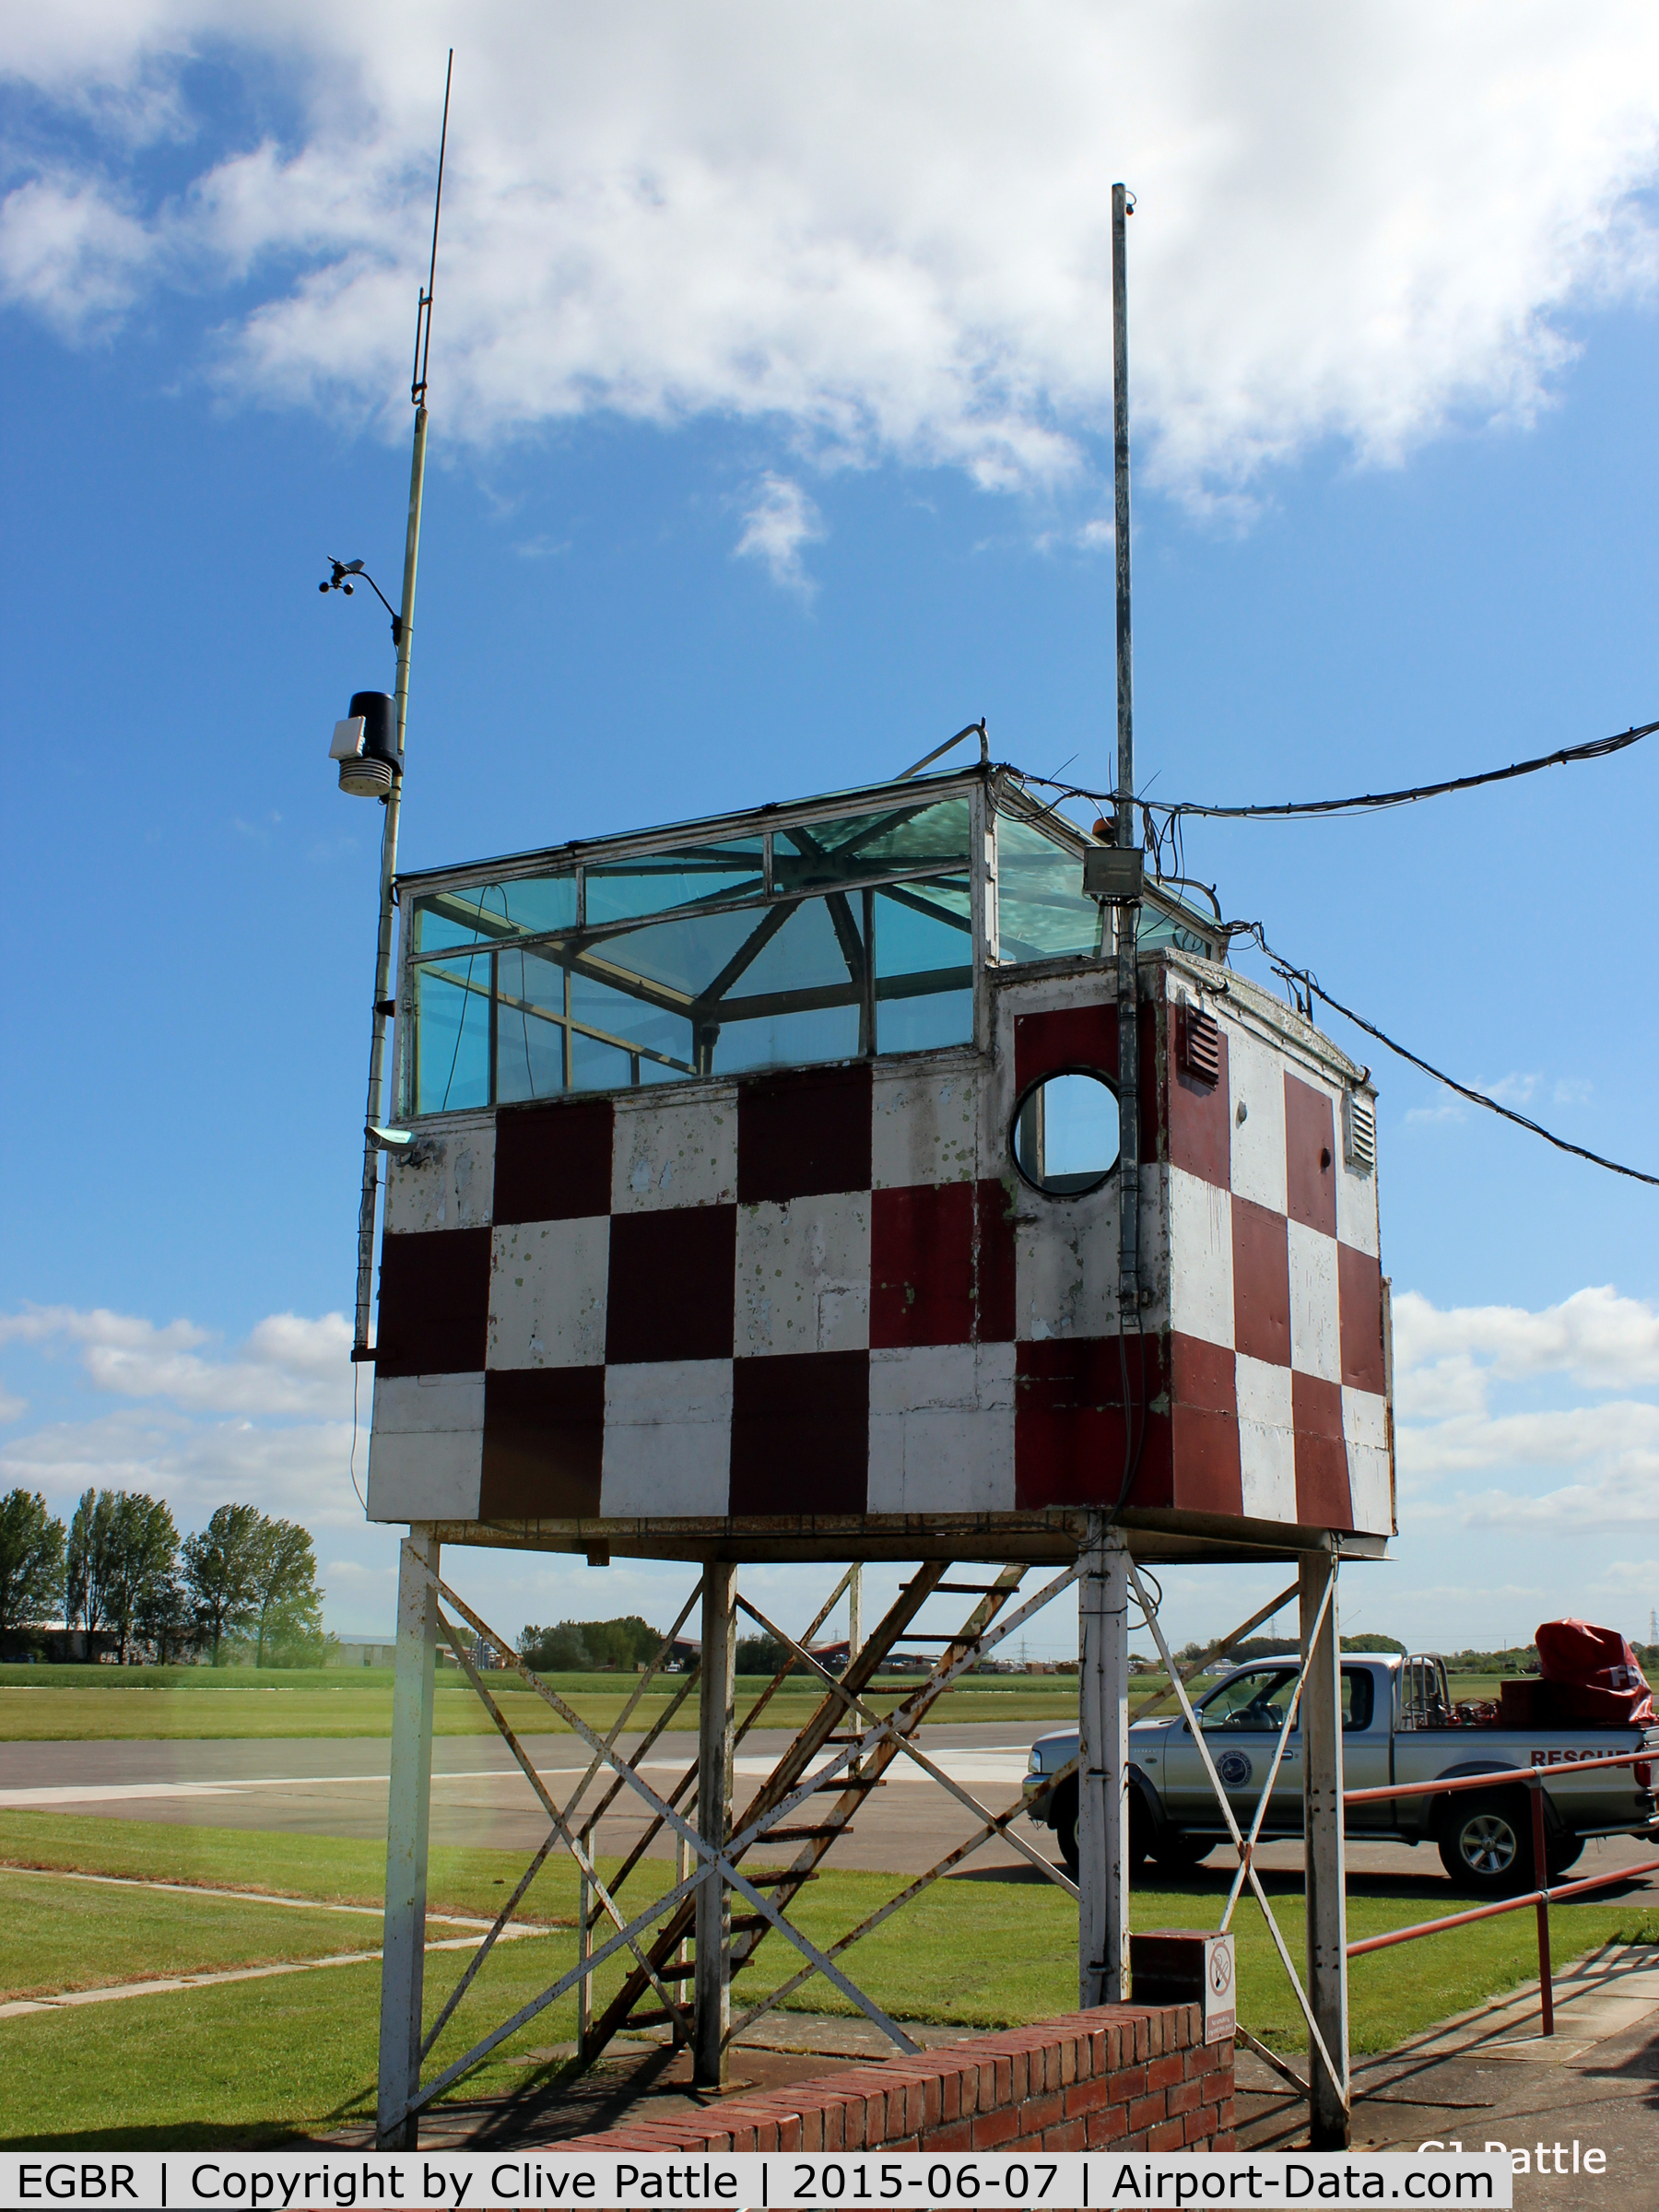 EGBR Airport - A view of the Tower at Breighton Airfield, Yorkshire EGBR